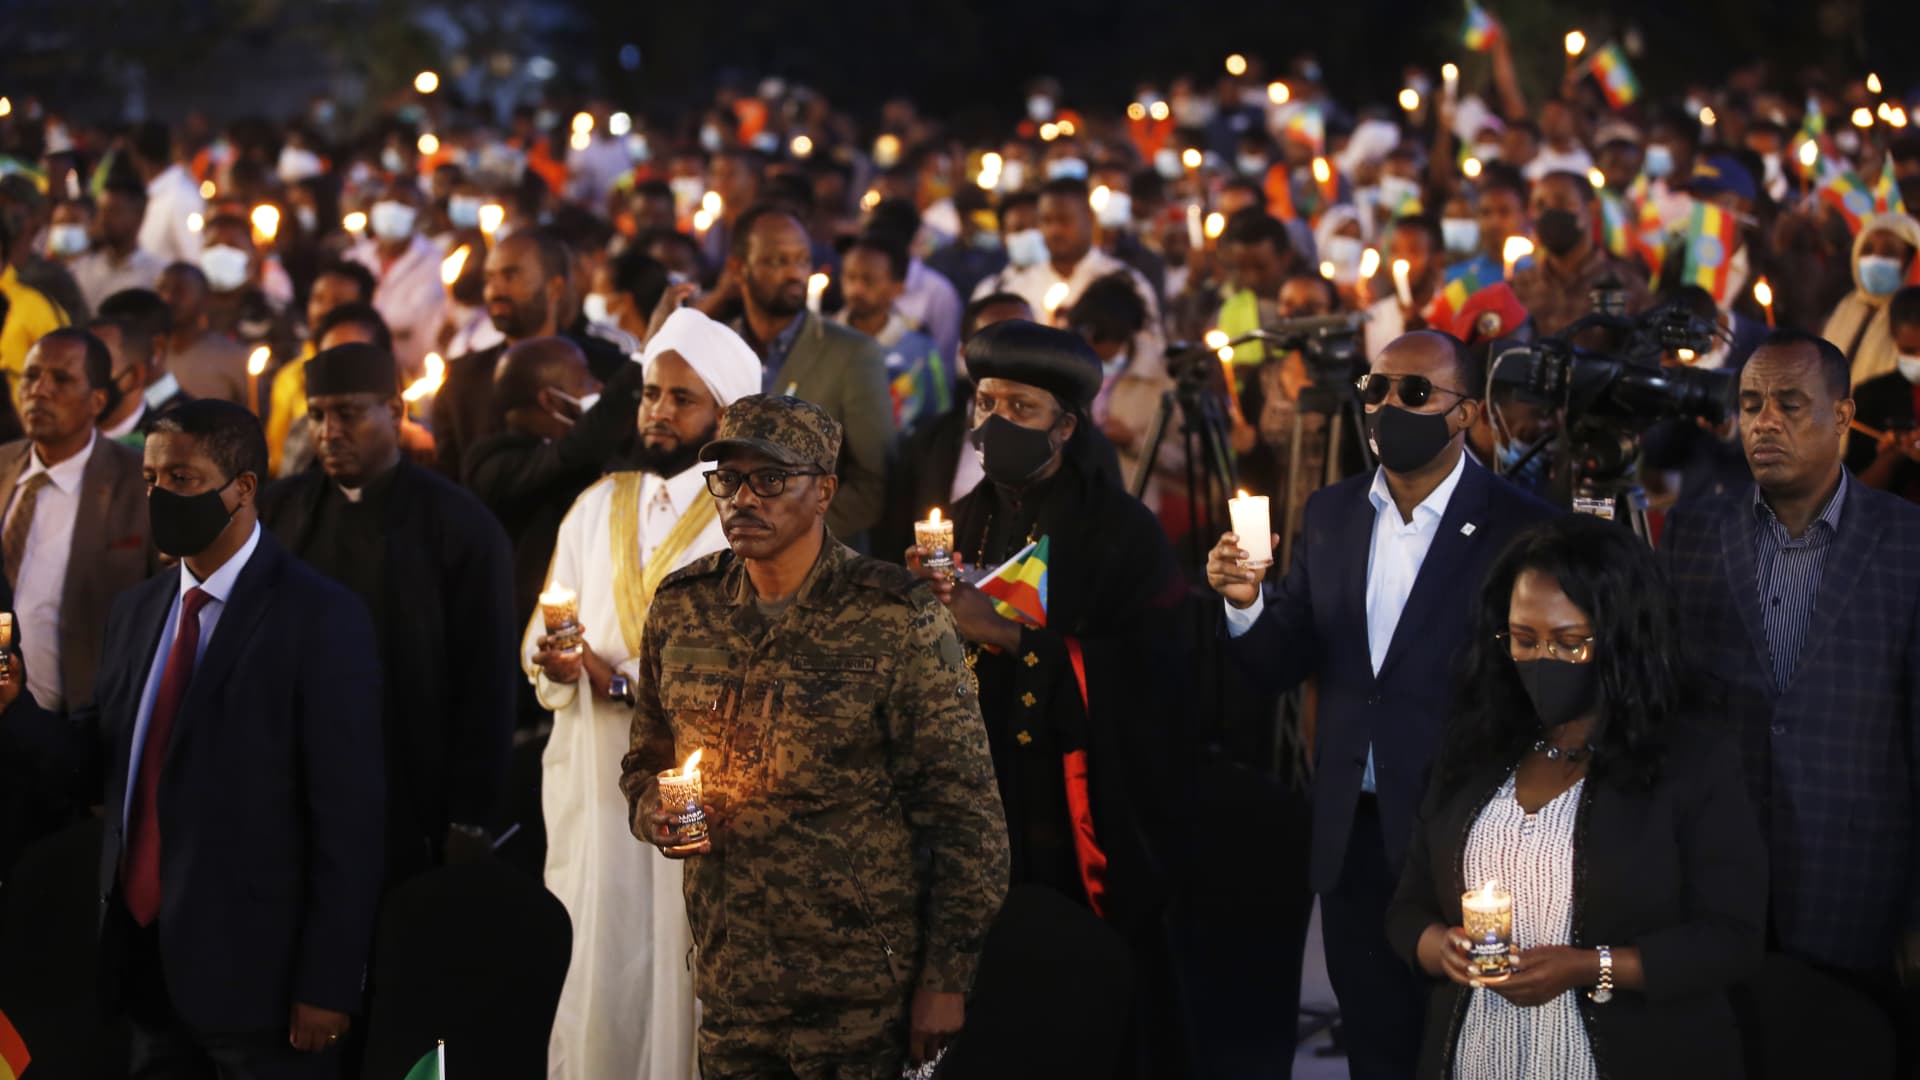 People hold lit candles in a memorial service for victims of the Tigray conflict organized by the city administration, in Addis Ababa, Ethiopia, on November 3, 2021.